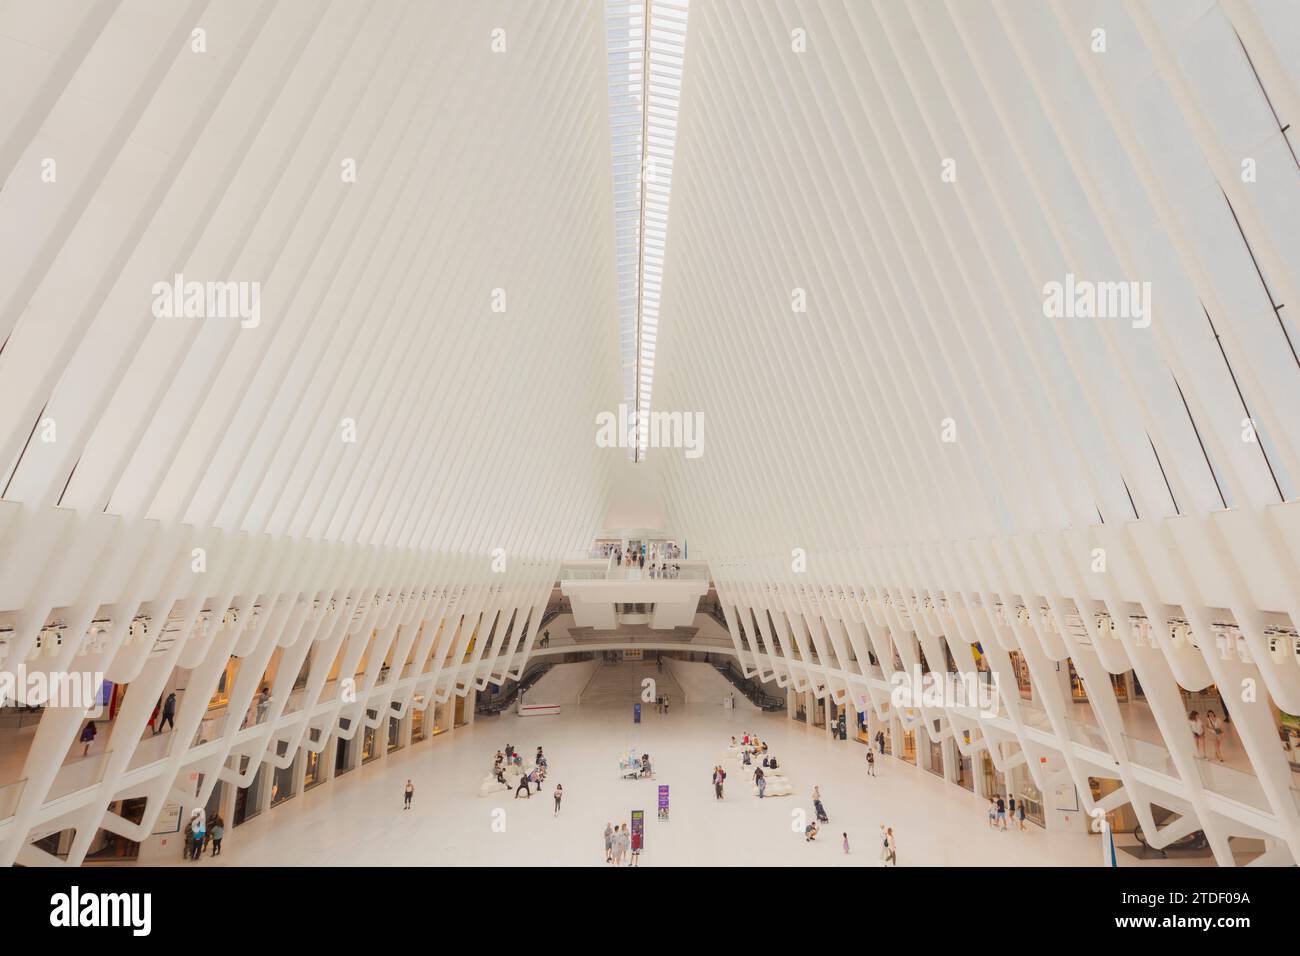 The interior roof and passenger concourse of the Oculus transportation hub at the World Trade Center in Lower Manhattan, New York City Stock Photo